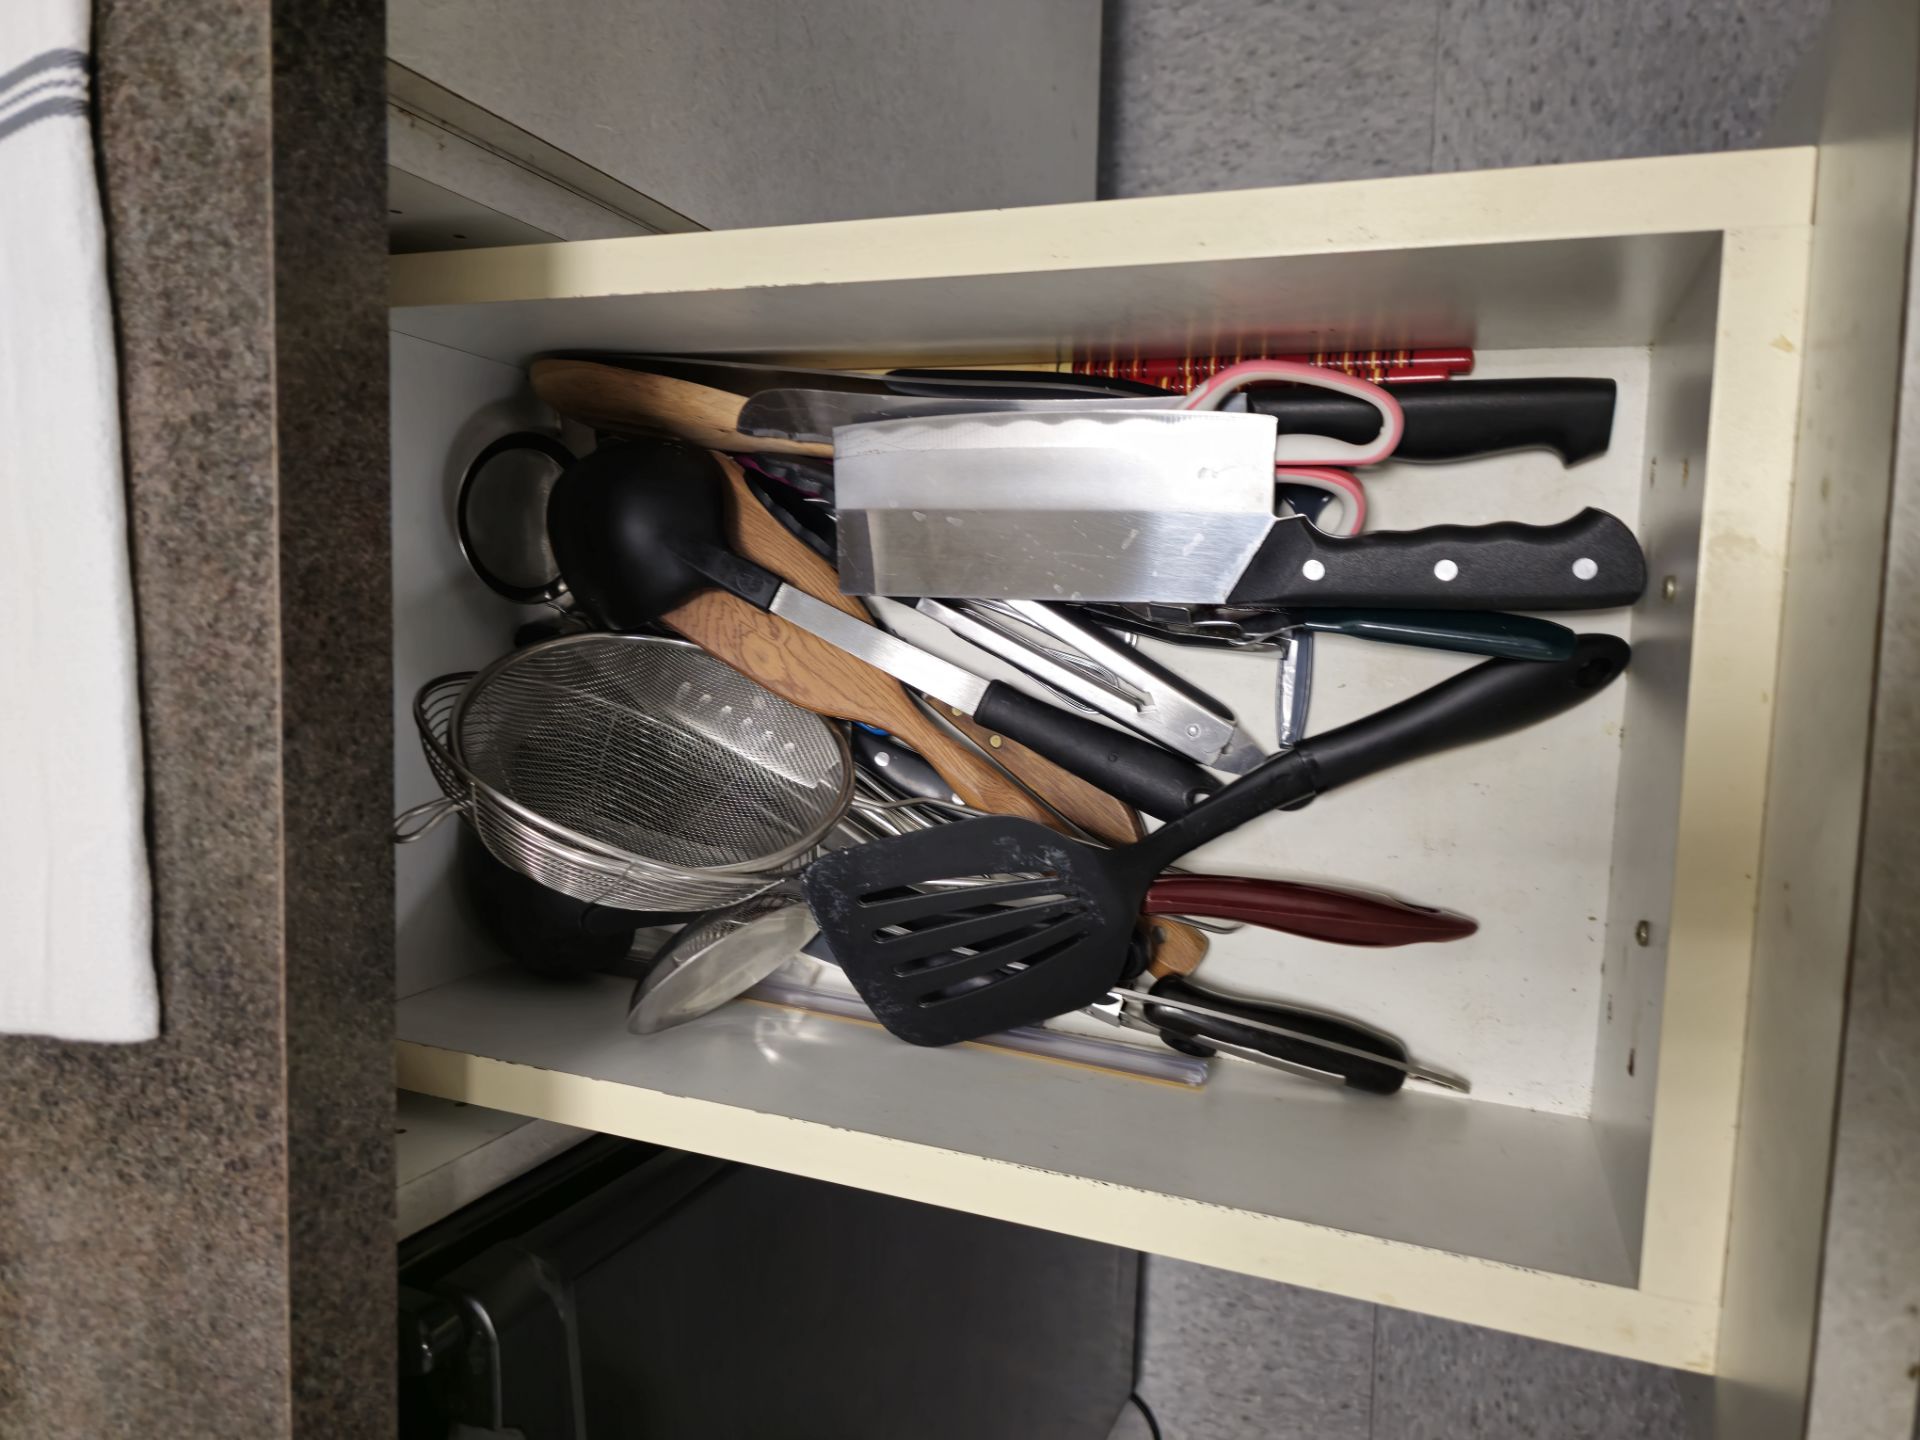 ALL KITCHEN UTENSILS AND SUPPLIES ON TOP AND INSID - Image 2 of 3